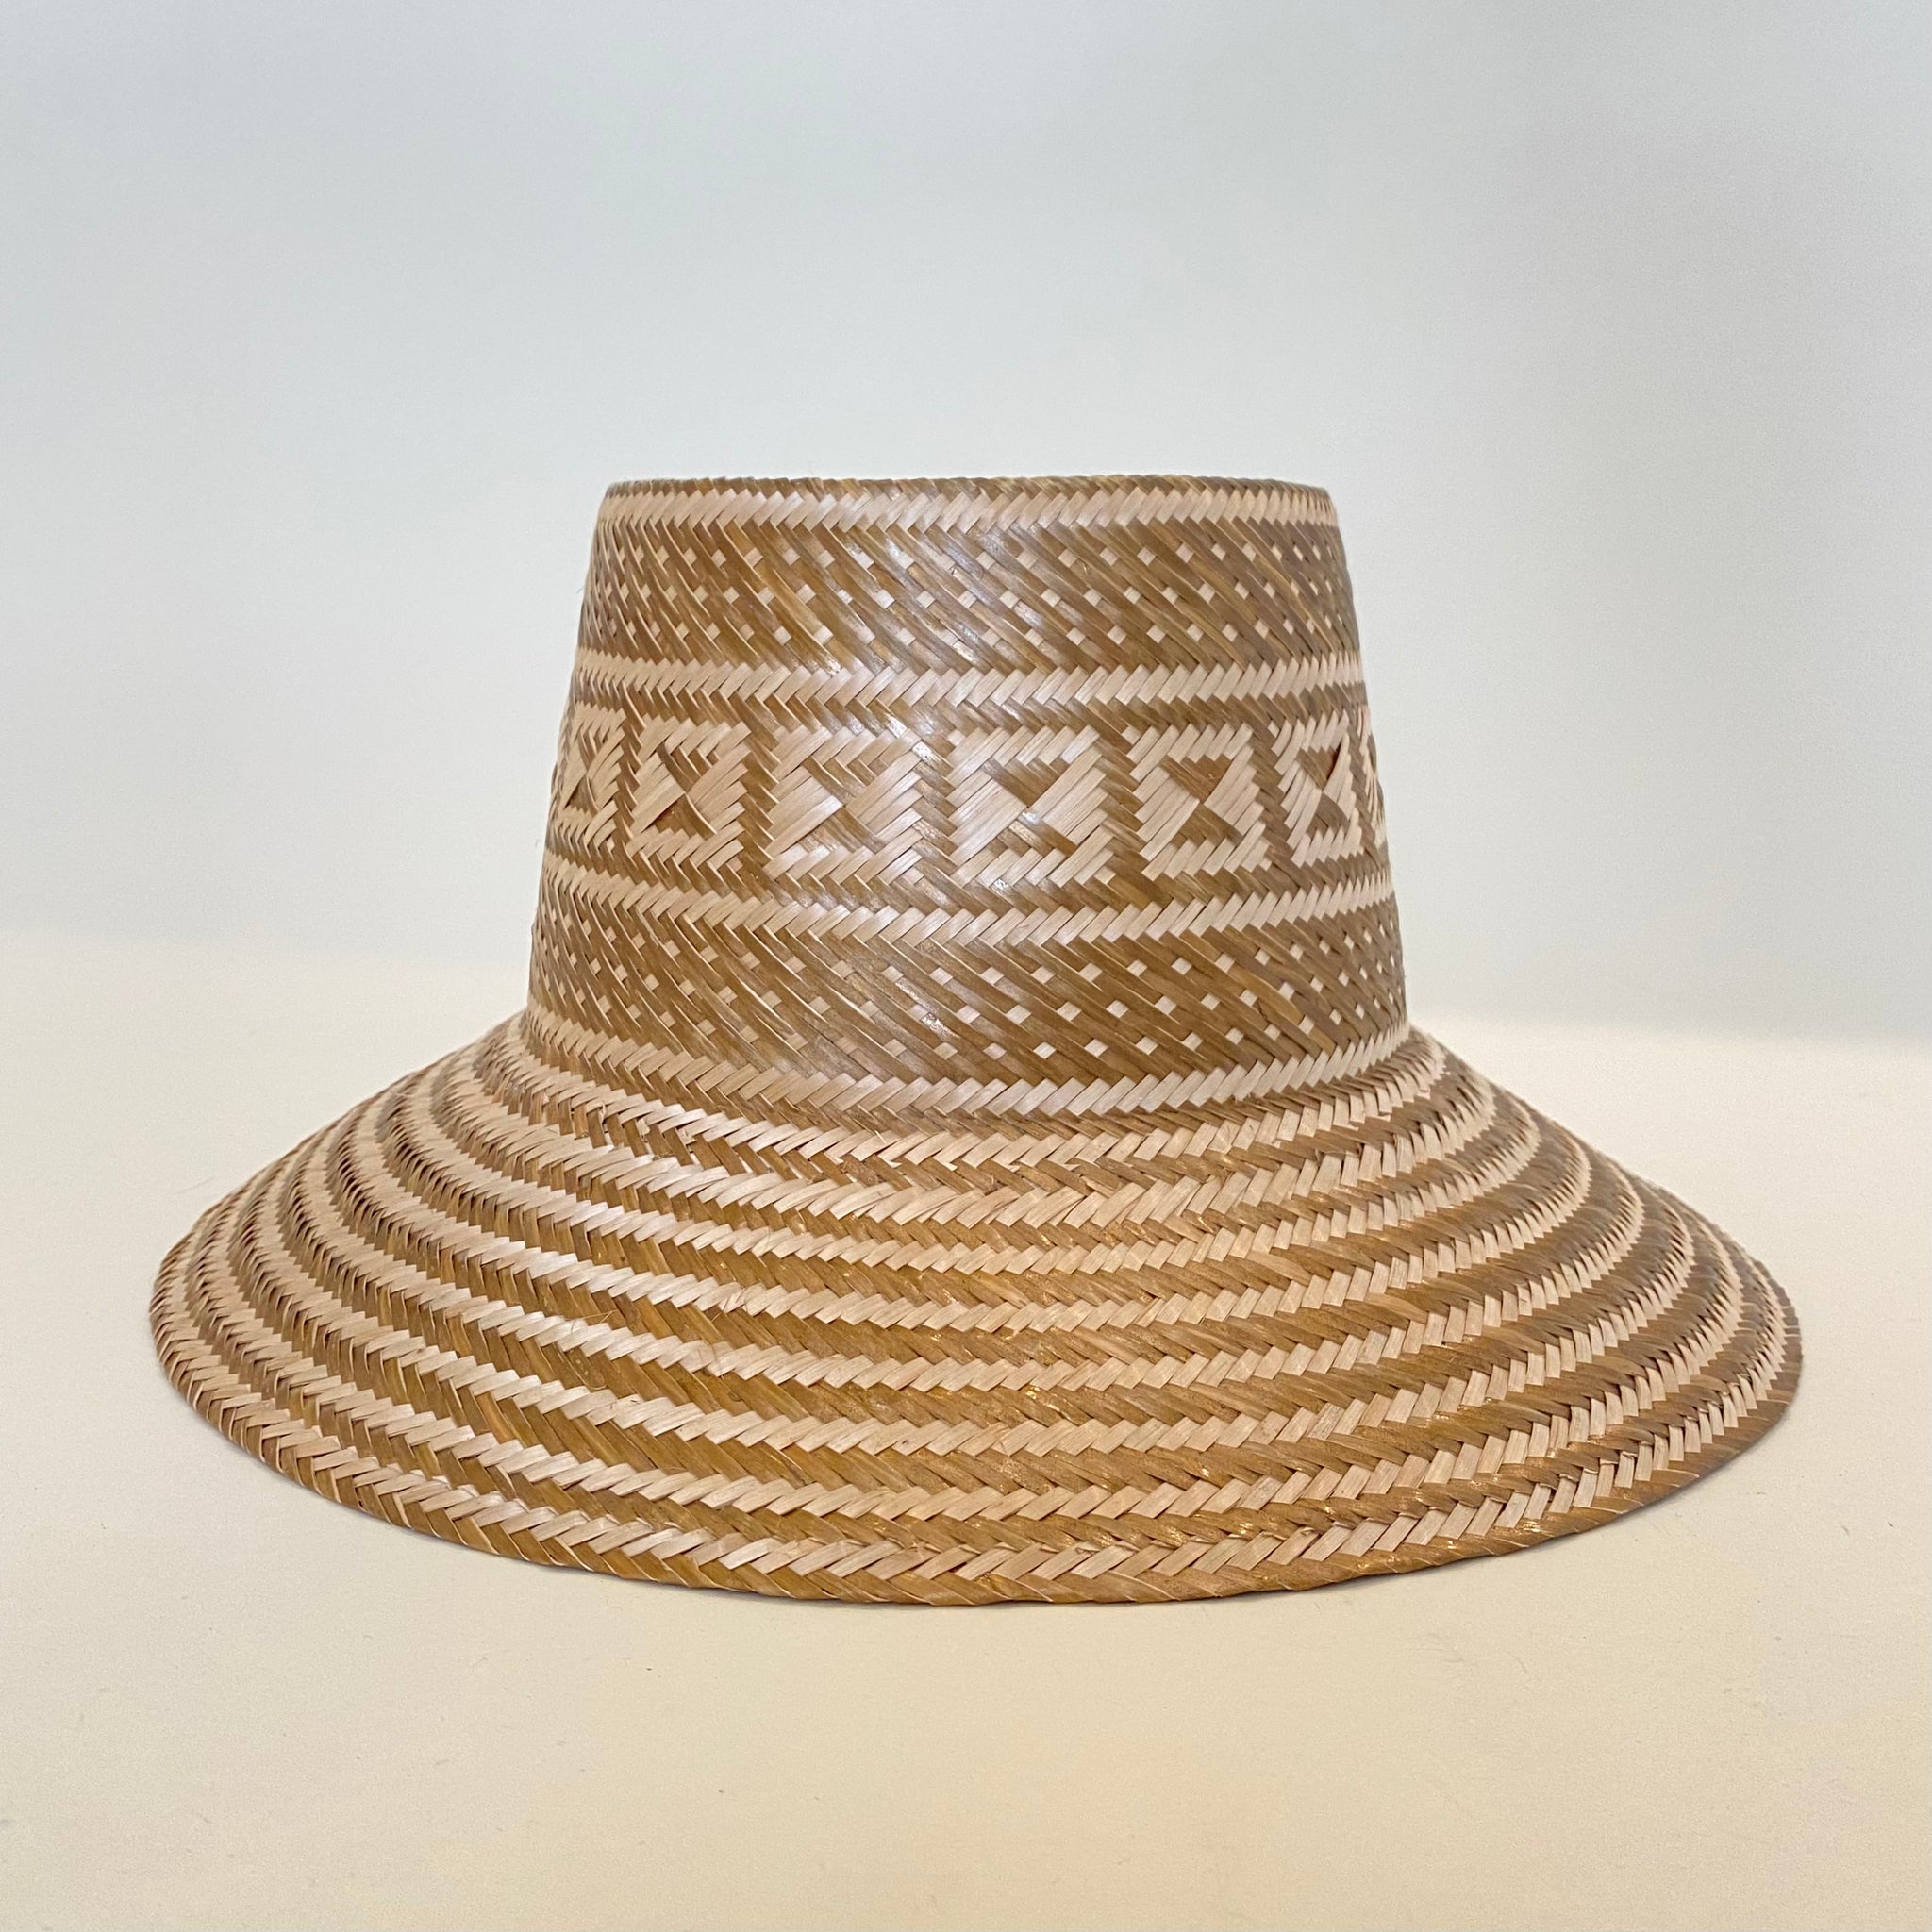 Natural Gold Handwoven Hat